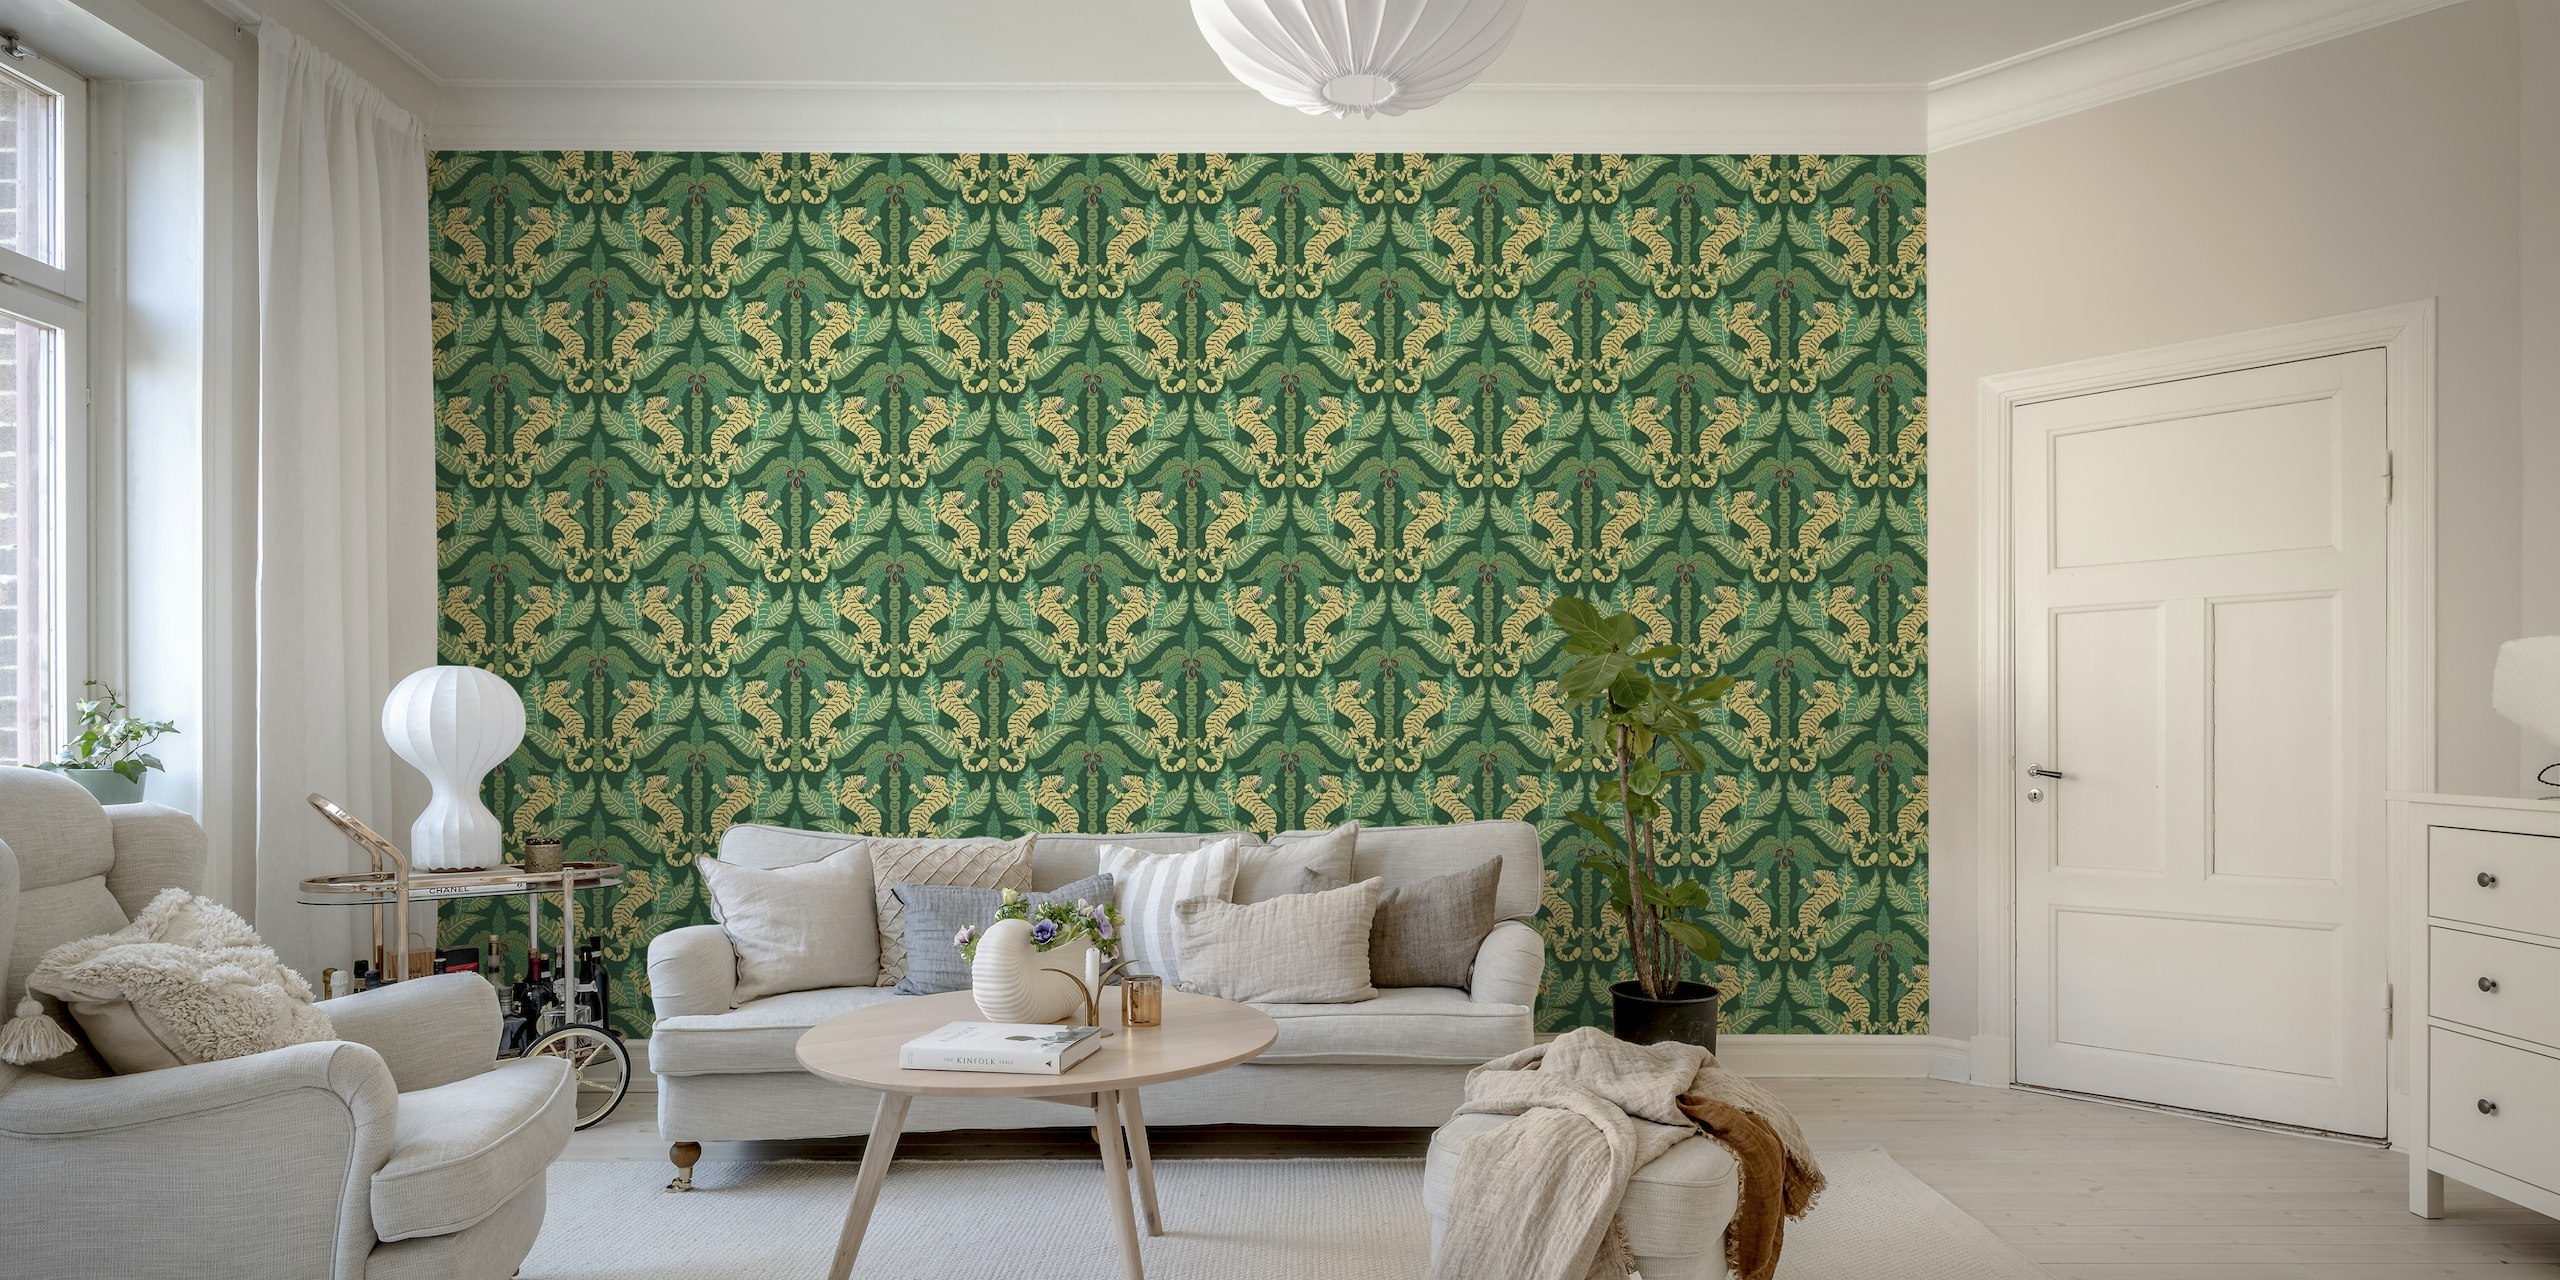 Tiger Damask - yellow and green tapete